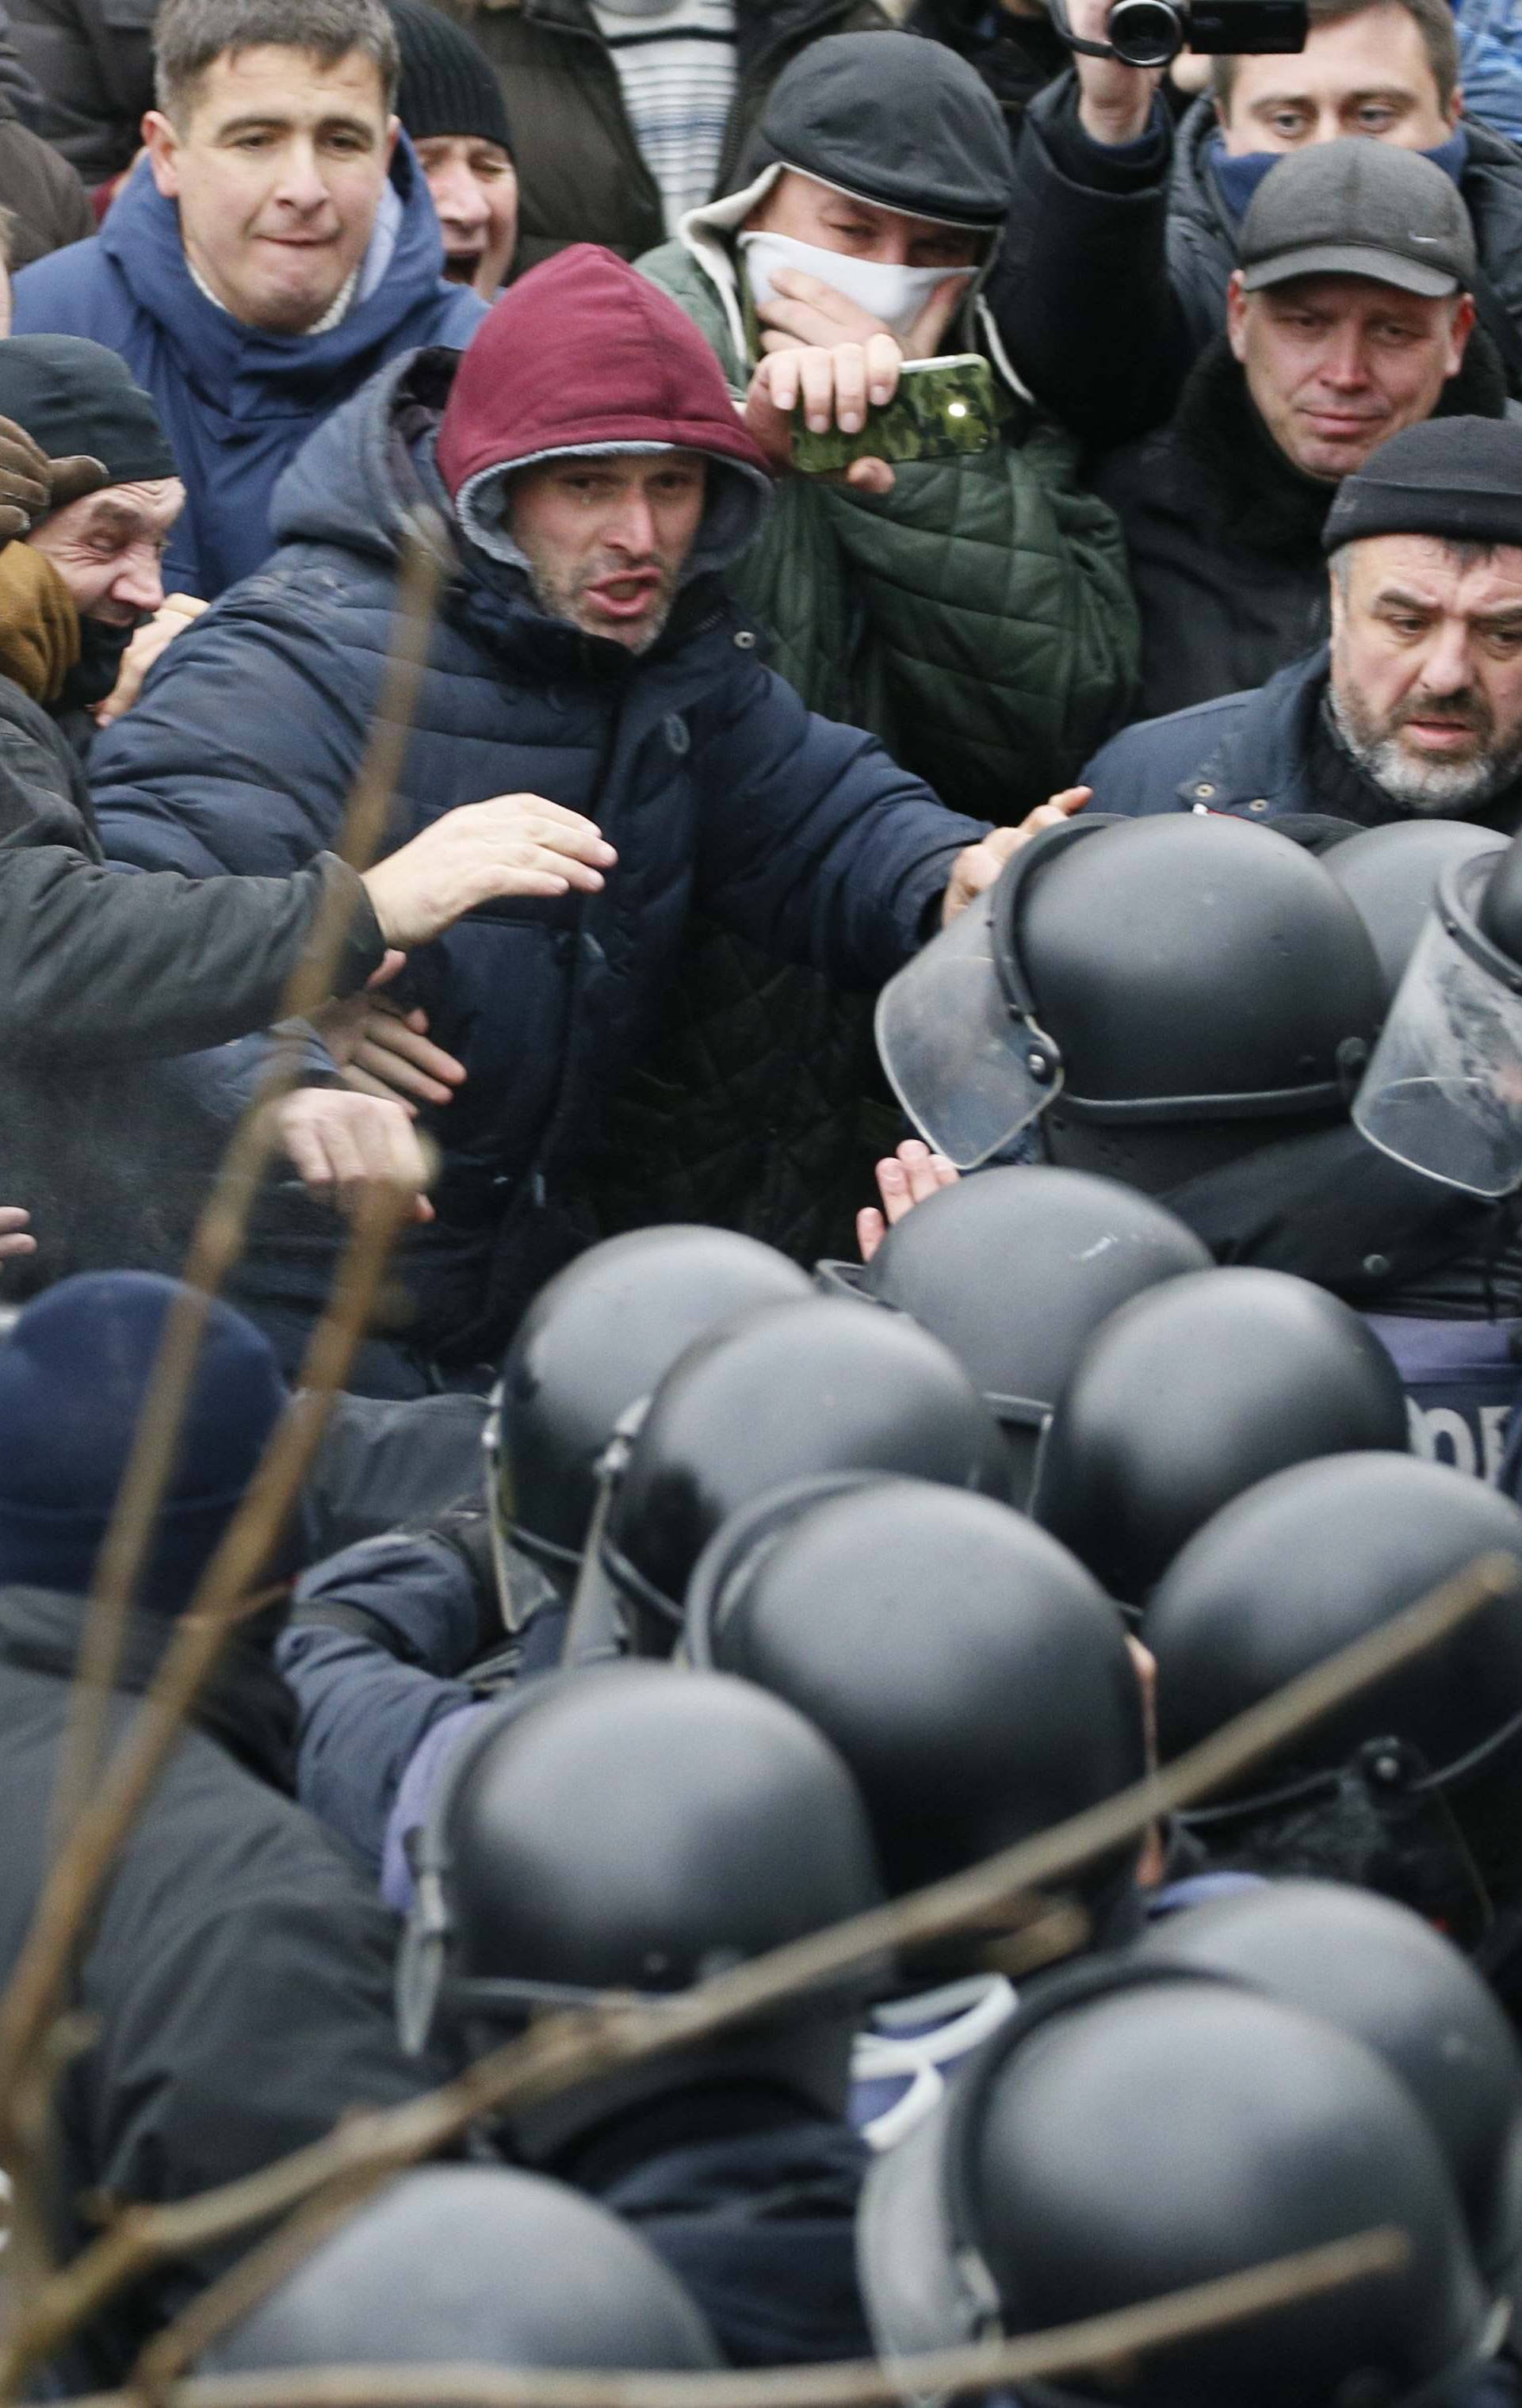 Police officers use tear gas against supporters of Georgian former President Mikheil Saakashvili during clashes in Kiev